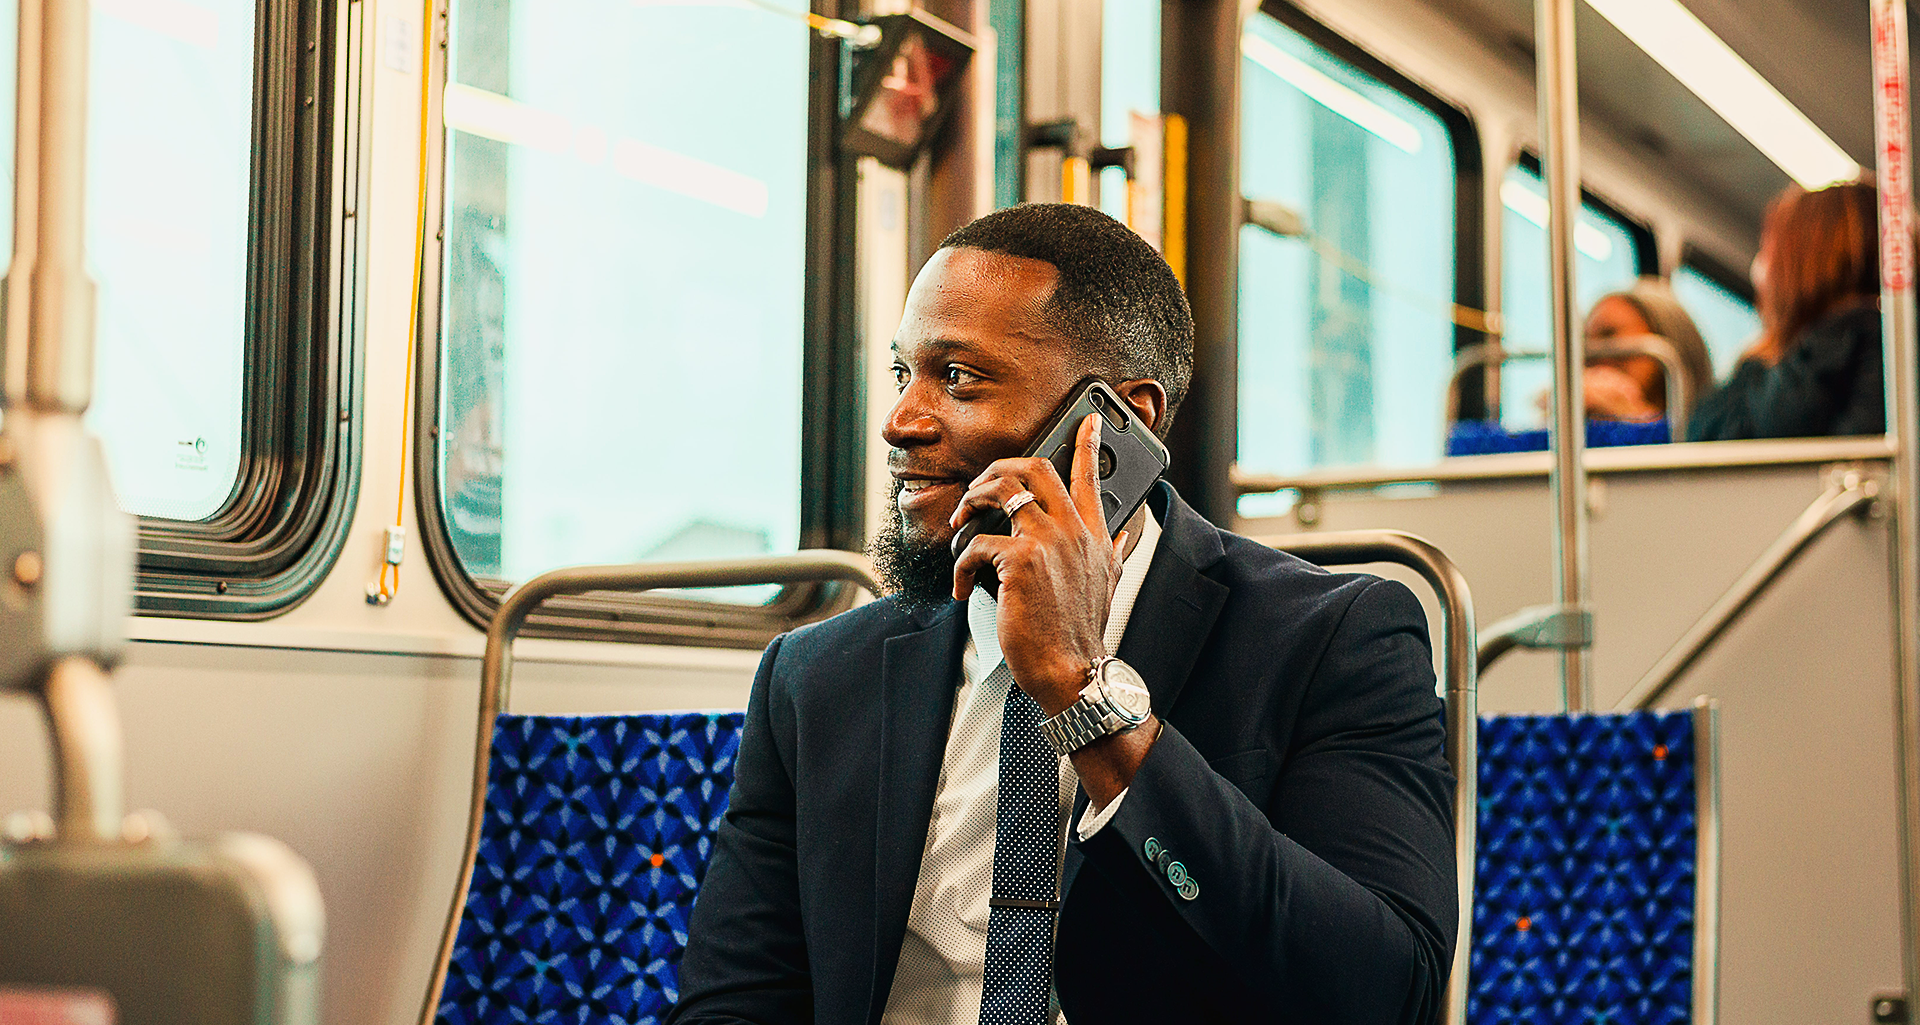 A man sitting in a bus and talking on phone